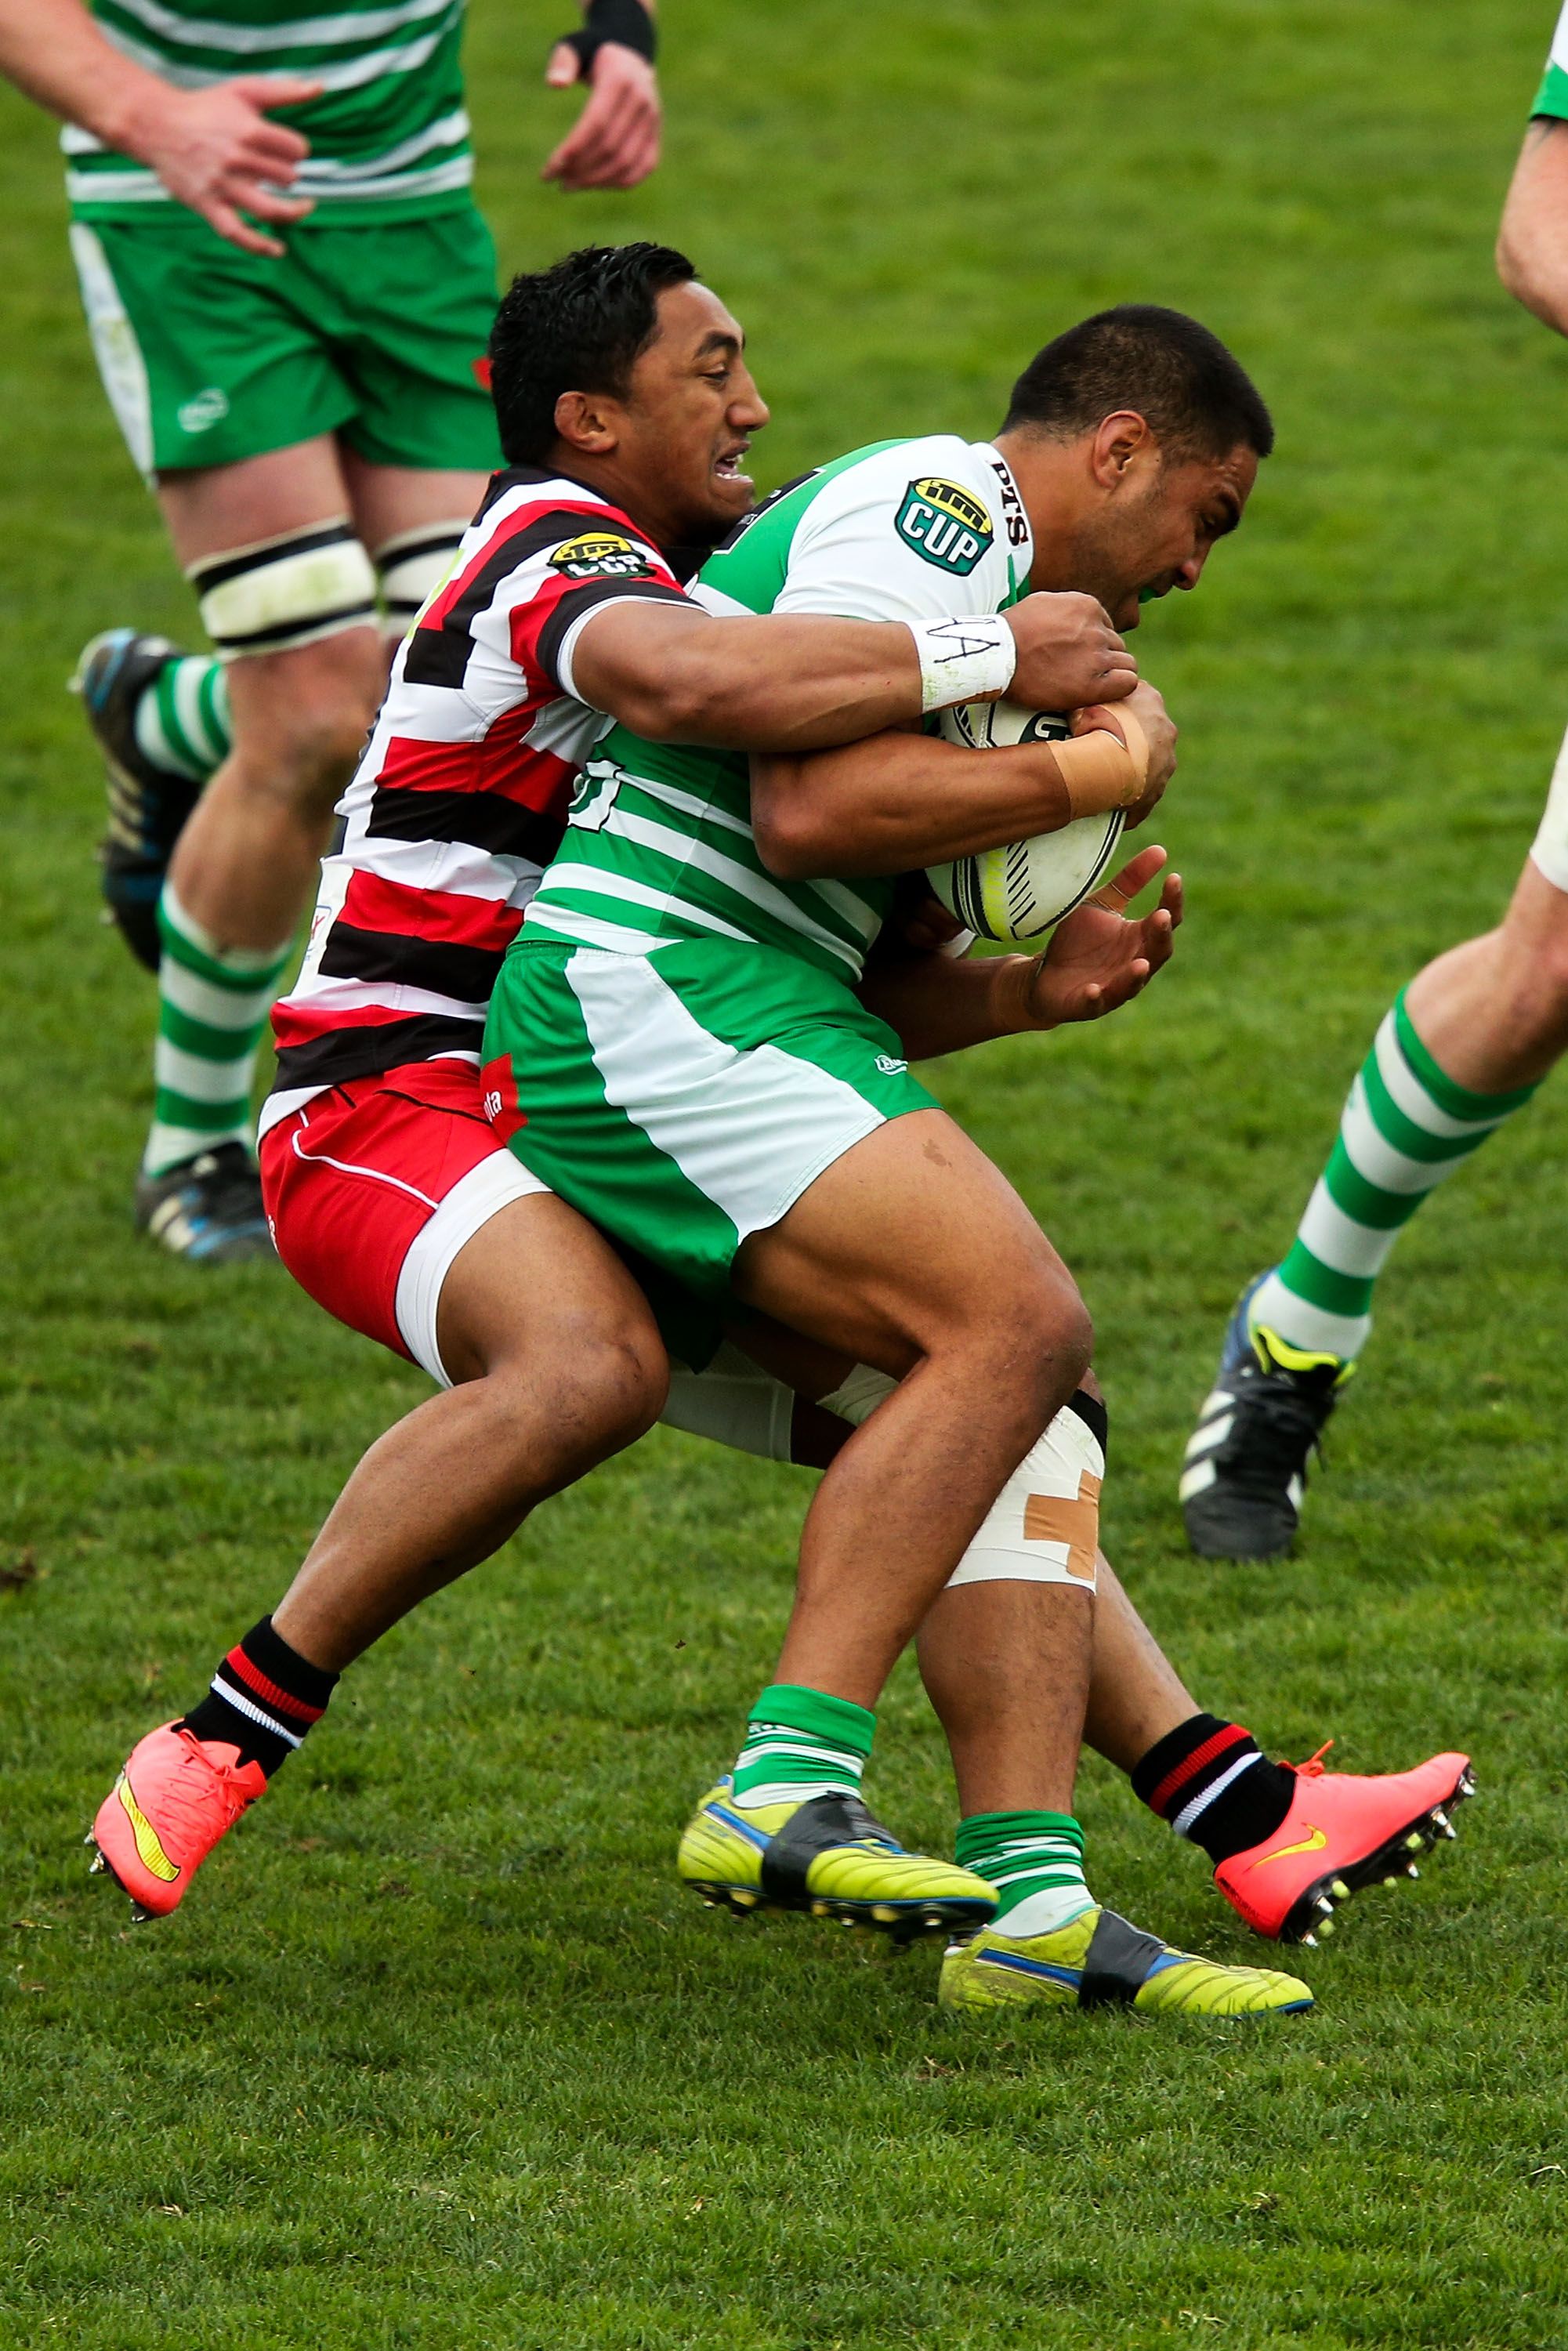 PALMERSTON NORTH, NEW ZEALAND - SEPTEMBER 07: Jaxon Tagavaitau of Manawatu is tackled by Bundee Aki of Counties Manukau during the ITM Cup match between Manawatu and Counties Manukau at FMG Stadium on September 7, 2014 in Palmerston North, New Zealand. (Photo by Hagen Hopkins/Getty Images)